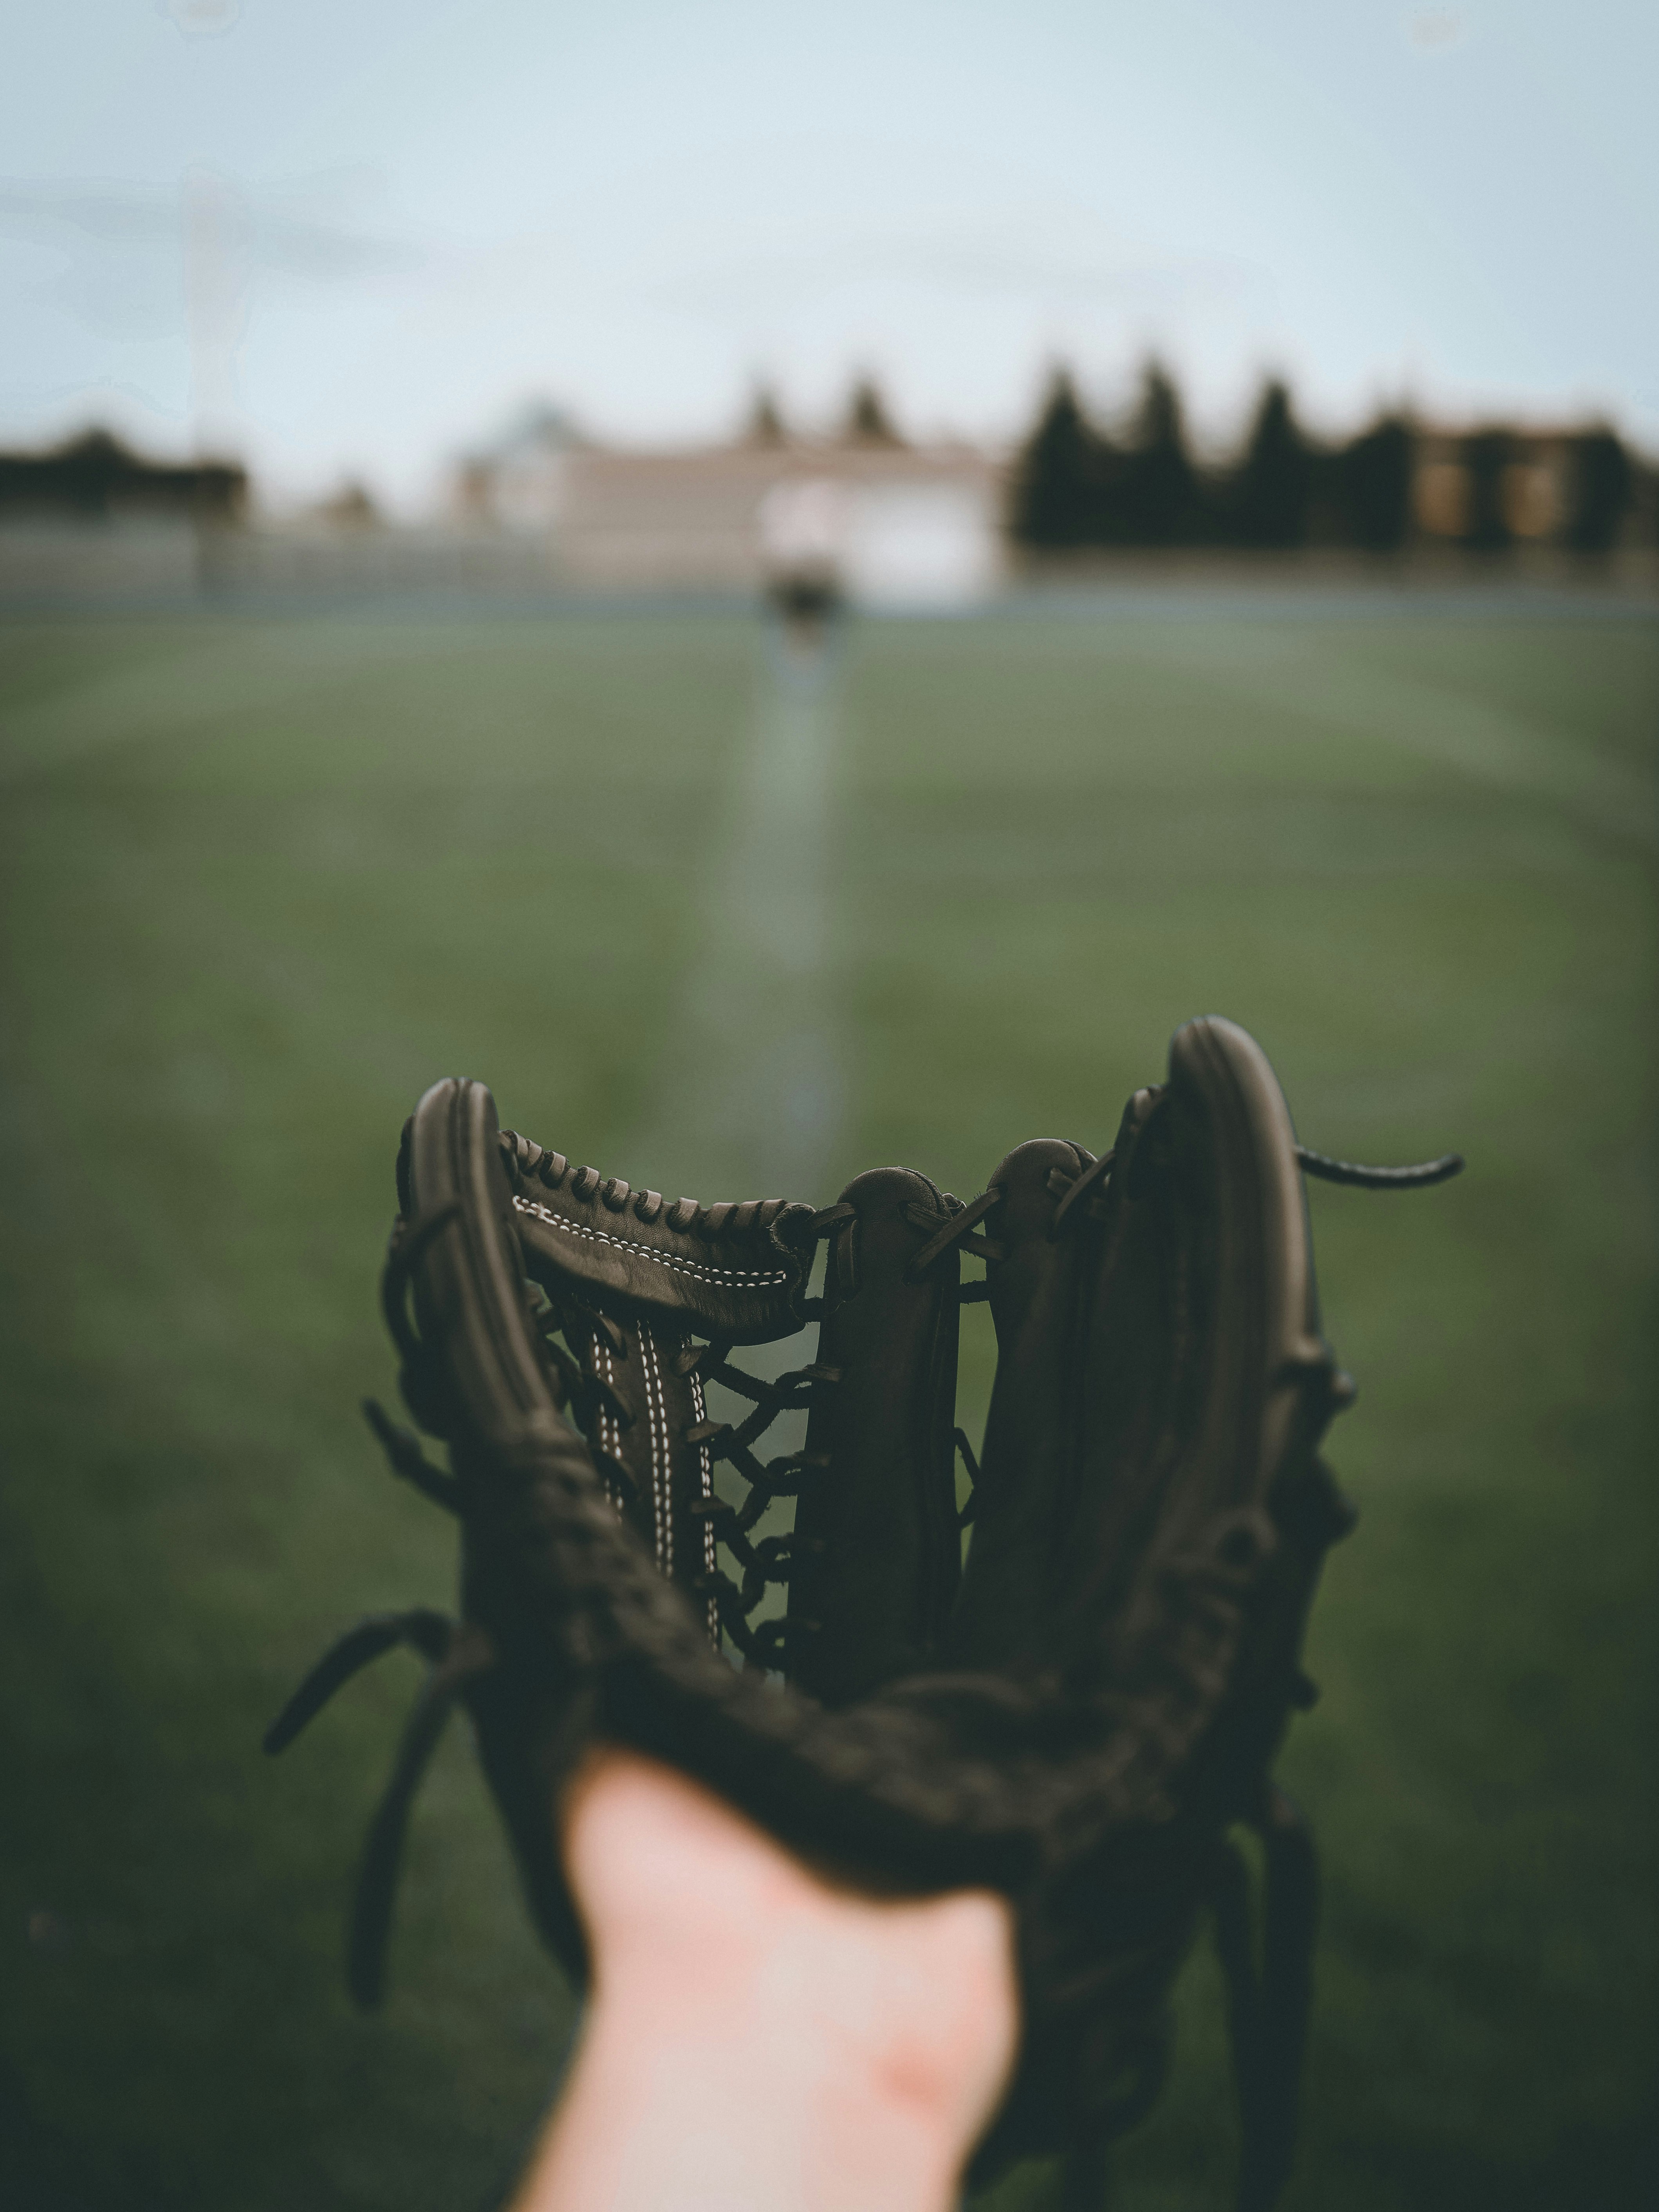 Few images capture the verve, energy, and tension of human life better than sports images. Capturing bodies in motion is no easy feat, so Unsplash has curated an only-the-finest selection of sporting images that cover everything from yoga and dancing to football and baseball